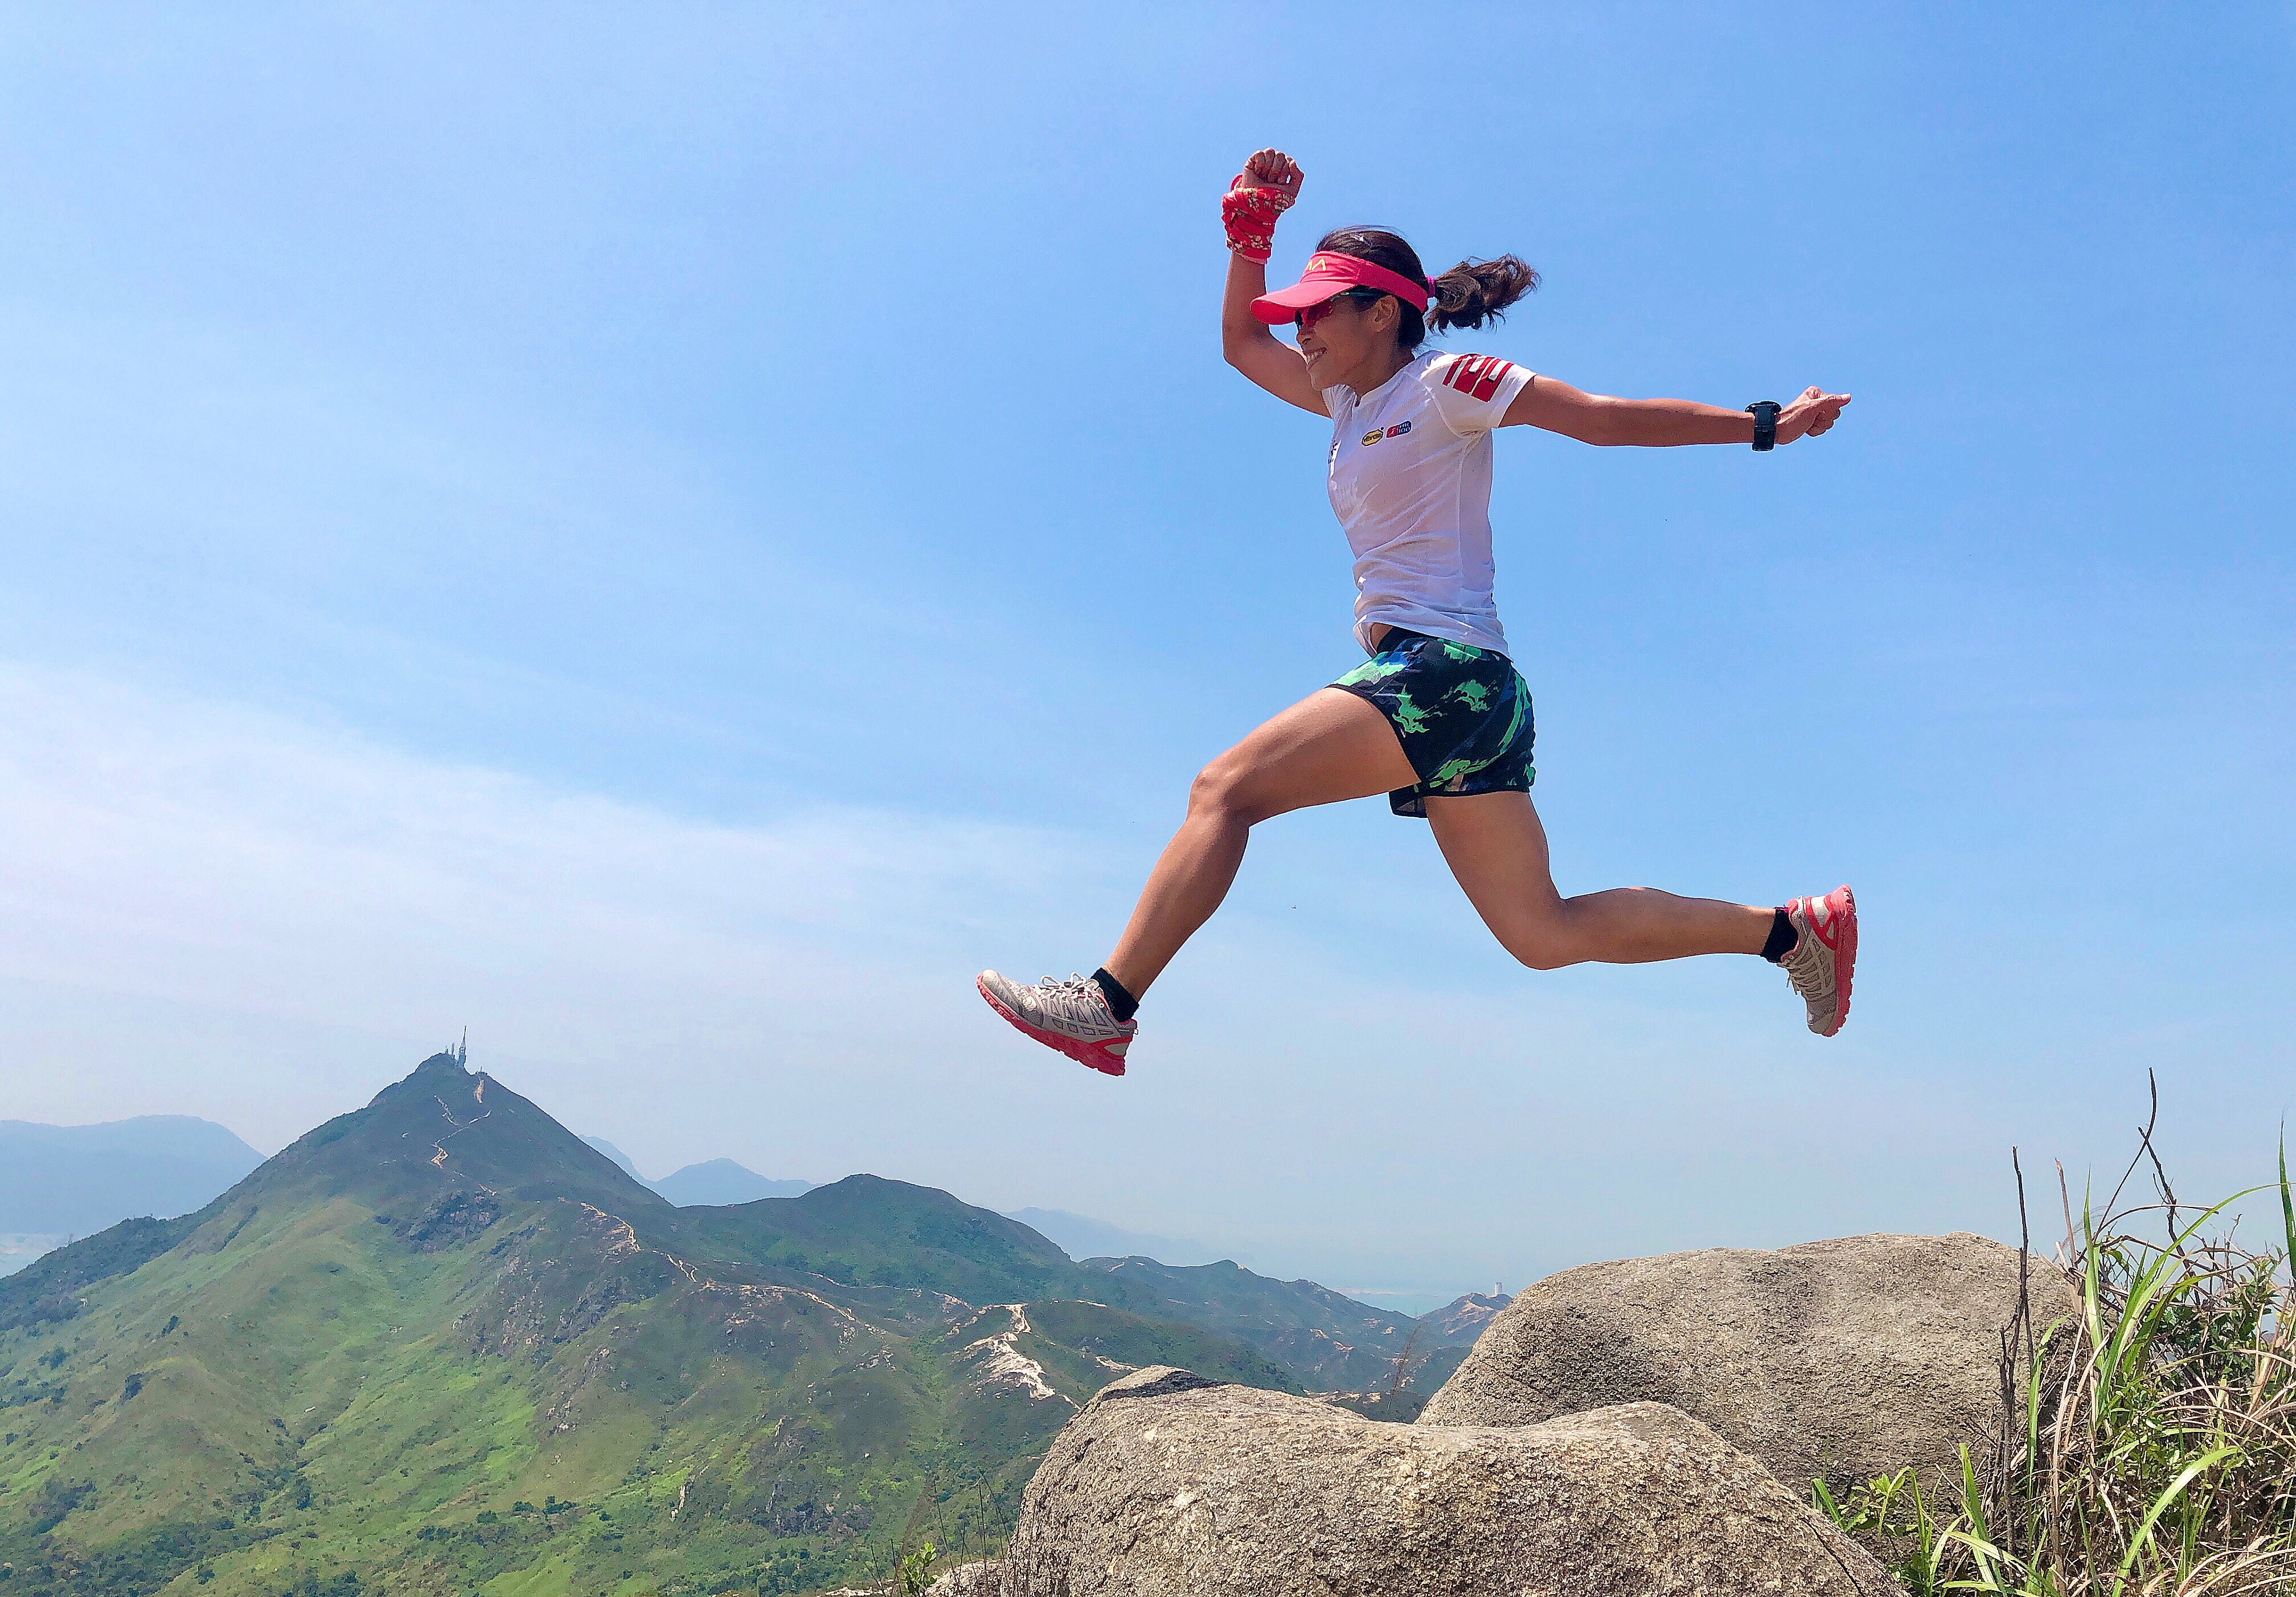 Trail runners who follow plant-based diets say they recover more quickly and have more energy. Above: vegan raw-food chef and trail runner Iris Mak in Castle Peak, Tuen Mun, Hong Kong in 2020. Photo: Iris Mak